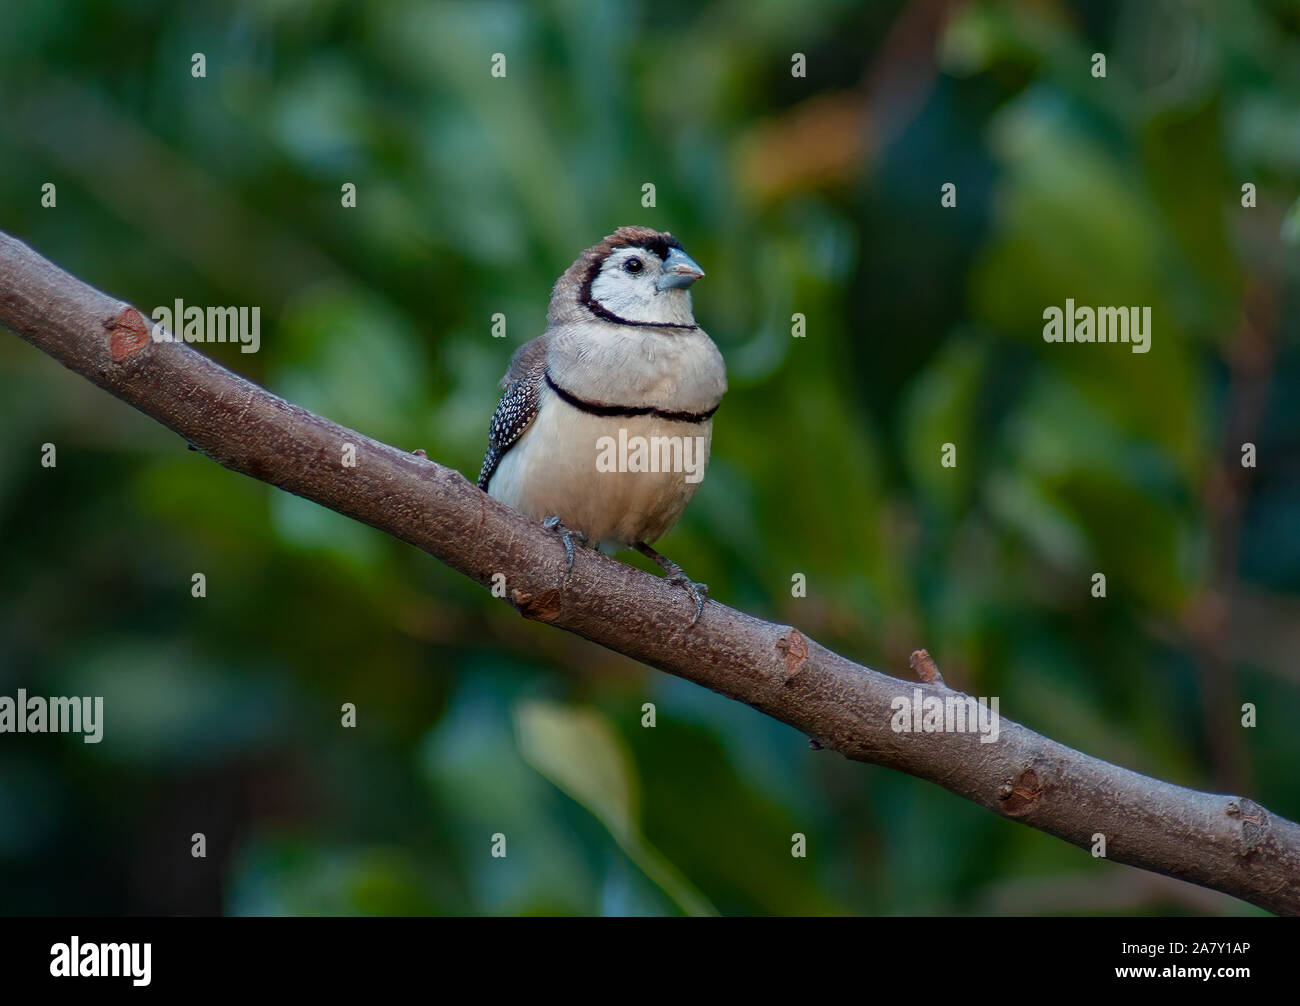 A Double-barred Finch perched on a twig in a garden setting Stock Photo